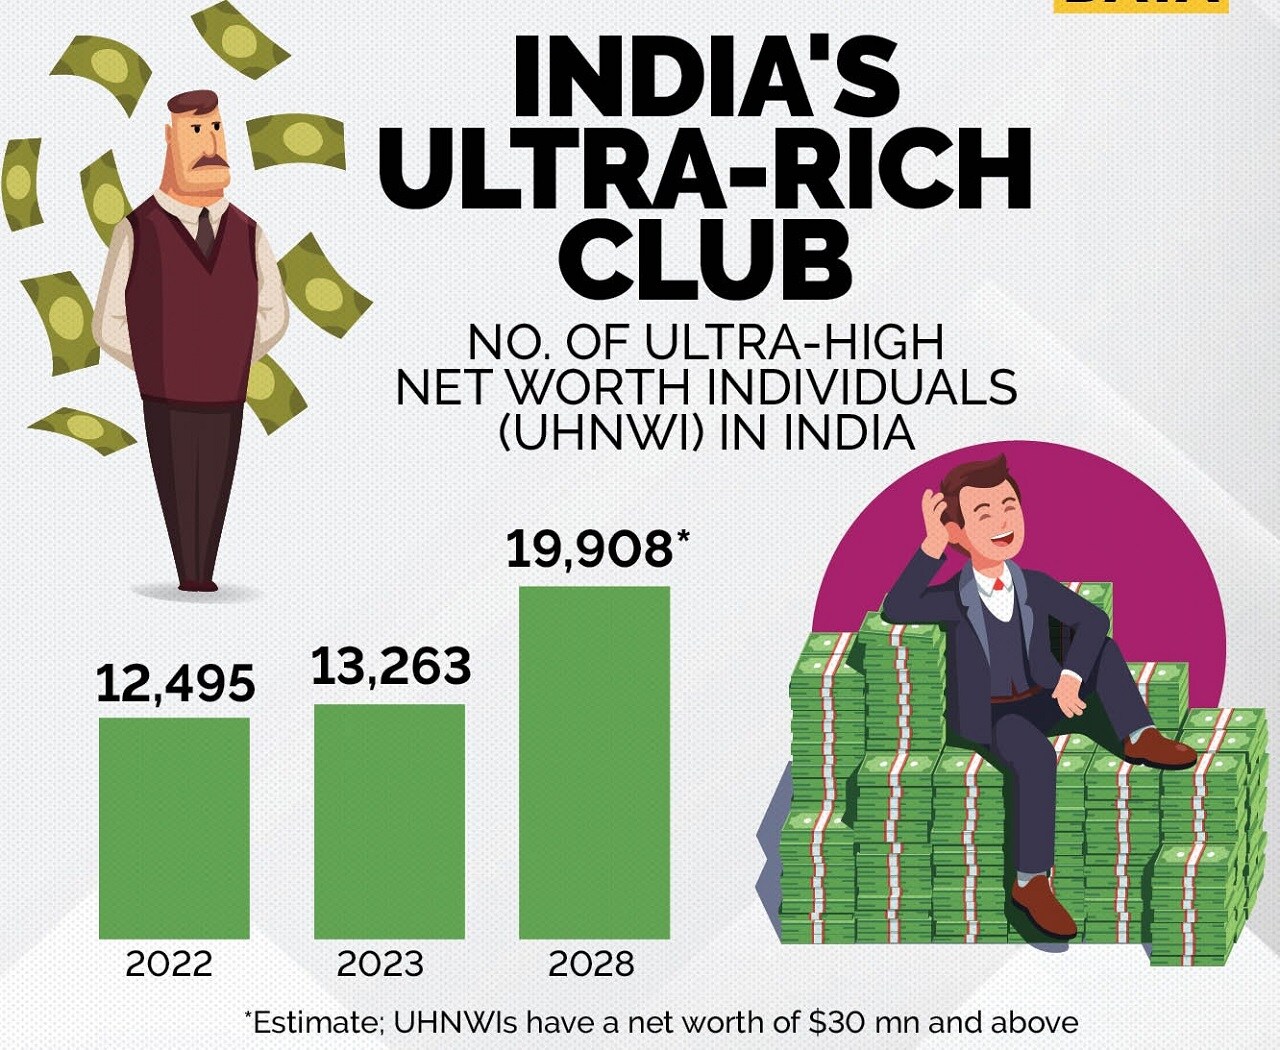 The People Research on India’s Consumer Economy estimates that the number of super-rich households earning over ₹2 crore a year increased to 1.8 million in 2021 from 1.06 million in 2015-16. By 2031, 35 million people will be earning in this category, and the number is expected to hit 100 million by 2046. 